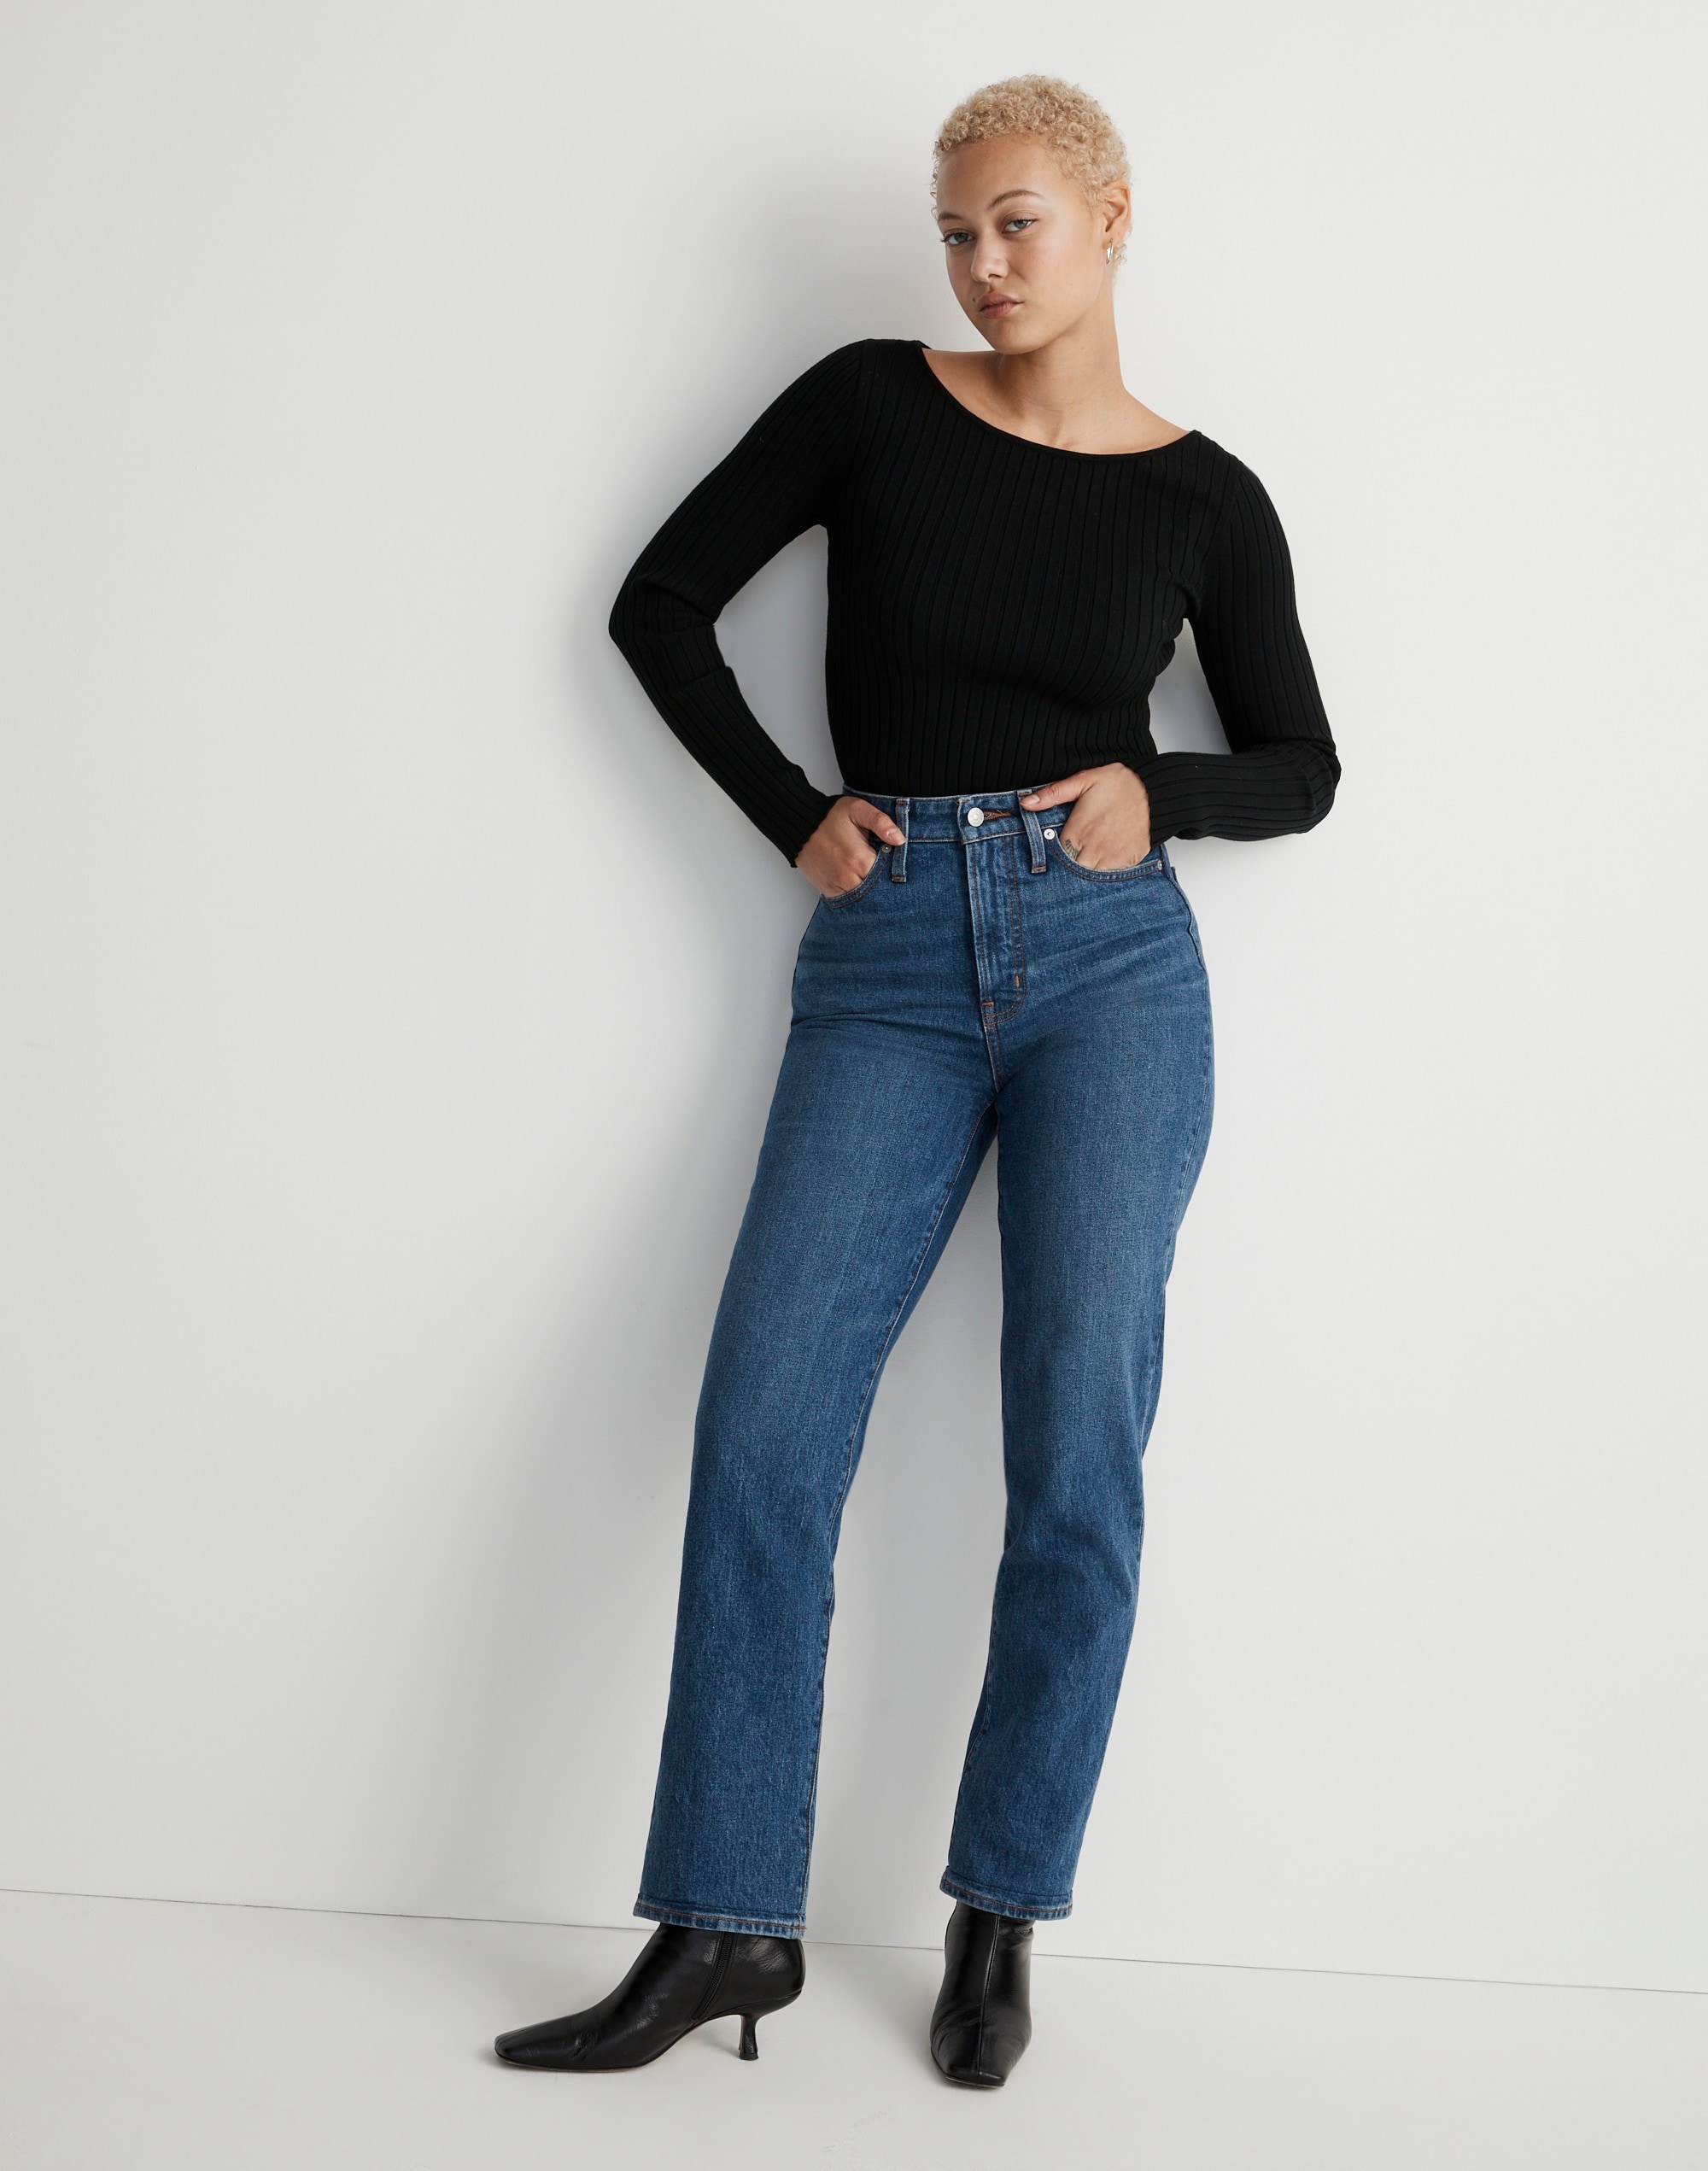 The Curvy Perfect Vintage Straight Jean in Hoye Wash